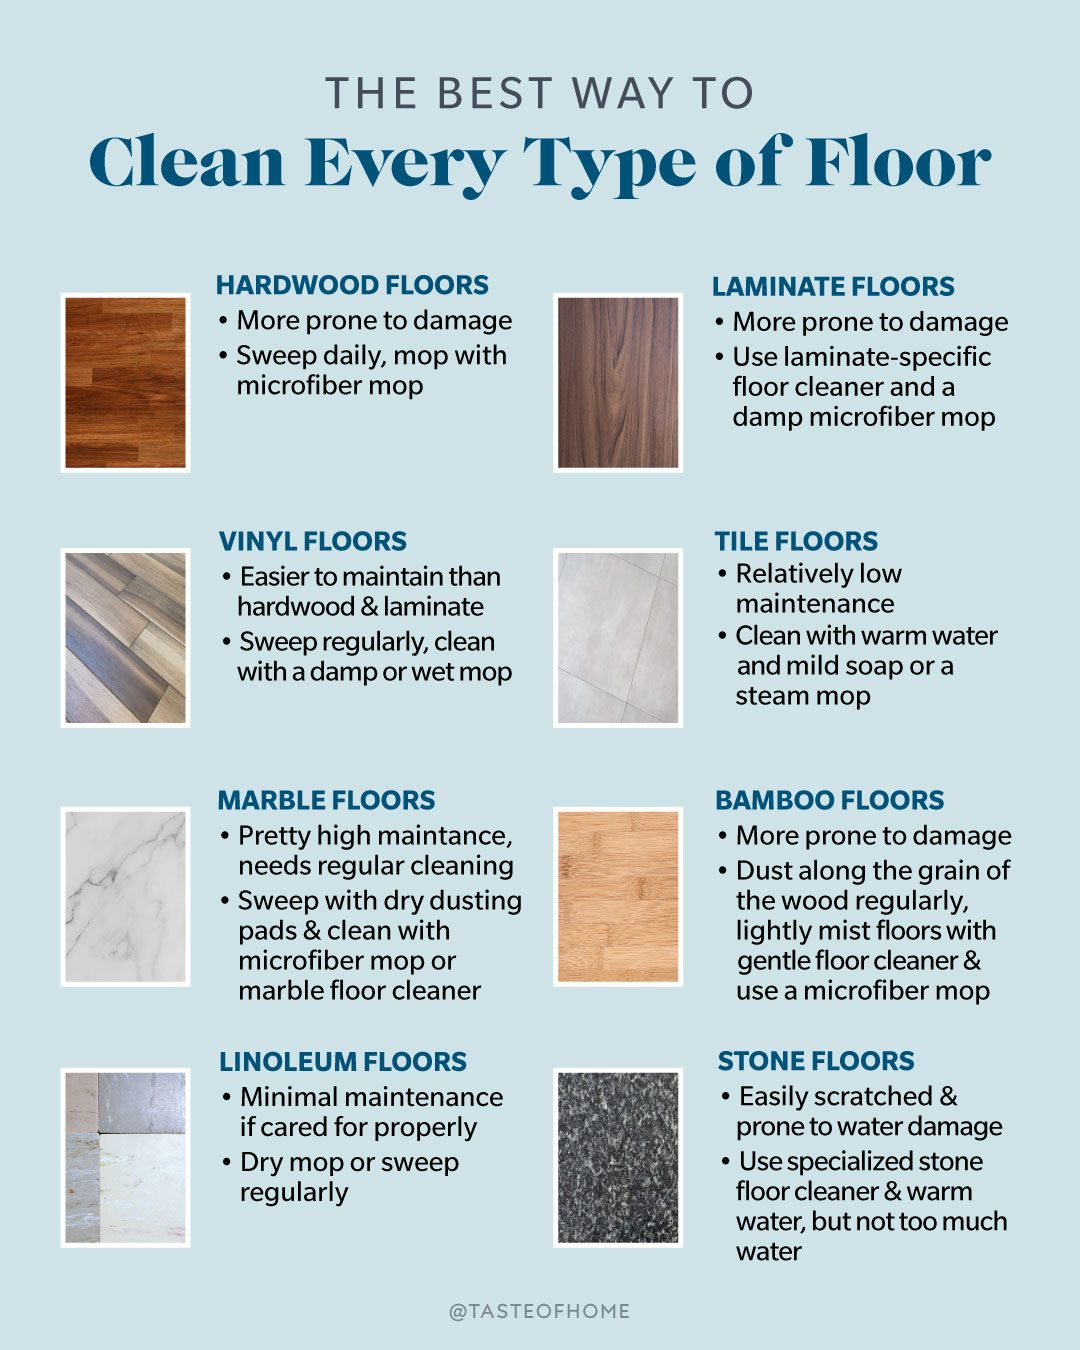 The Ultimate Guide to Cleaning and Maintaining Linoleum Floors